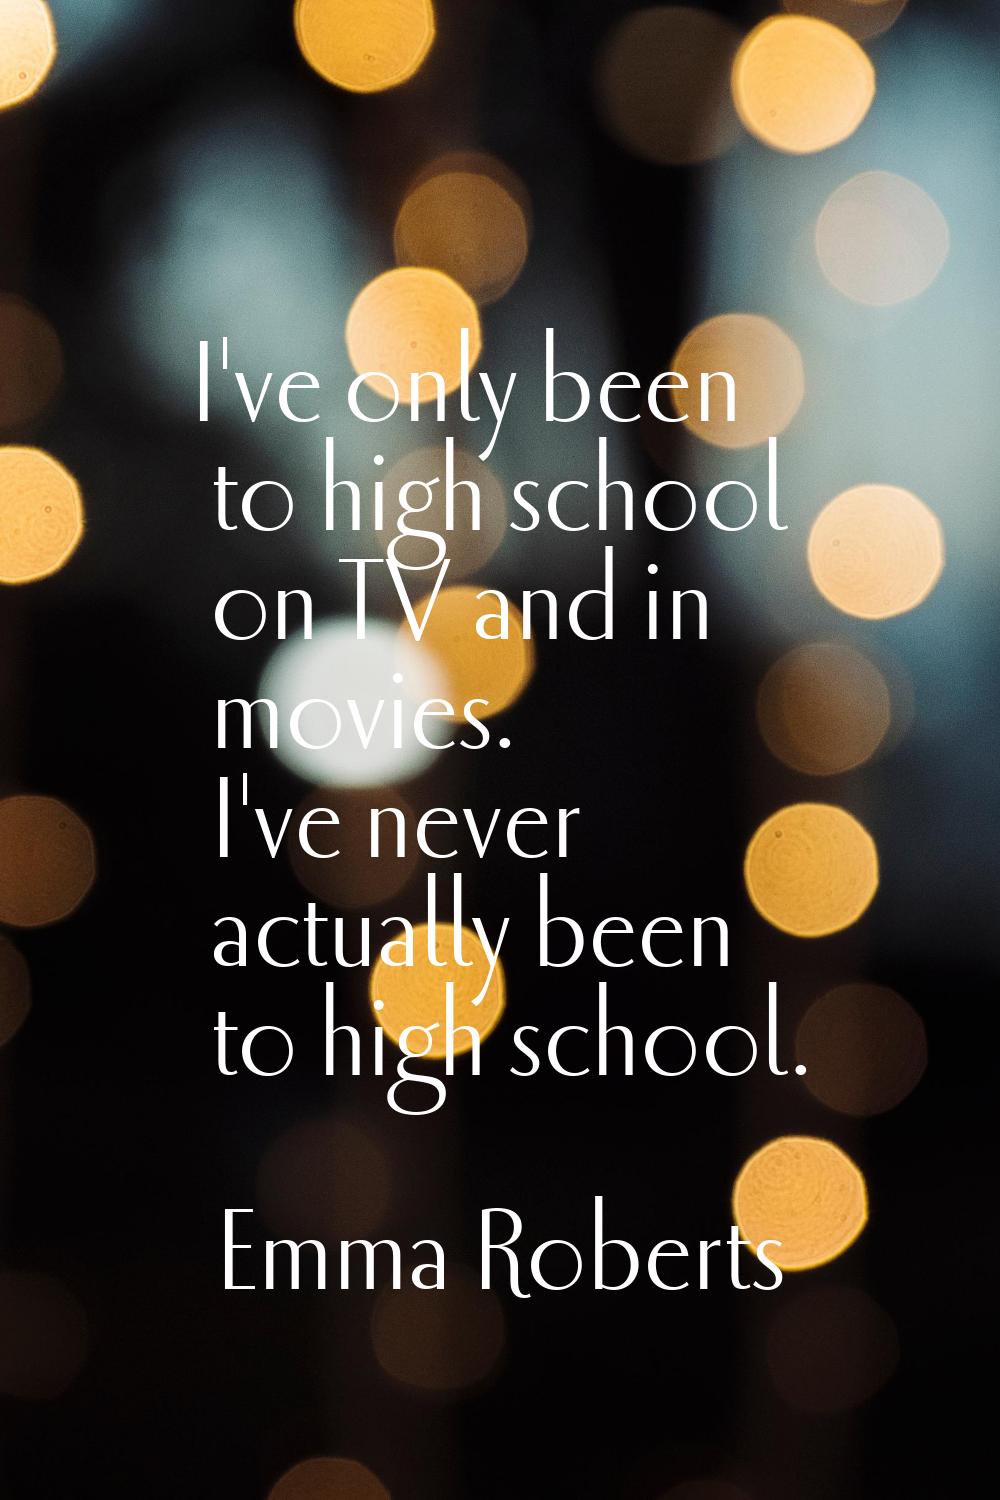 I've only been to high school on TV and in movies. I've never actually been to high school.